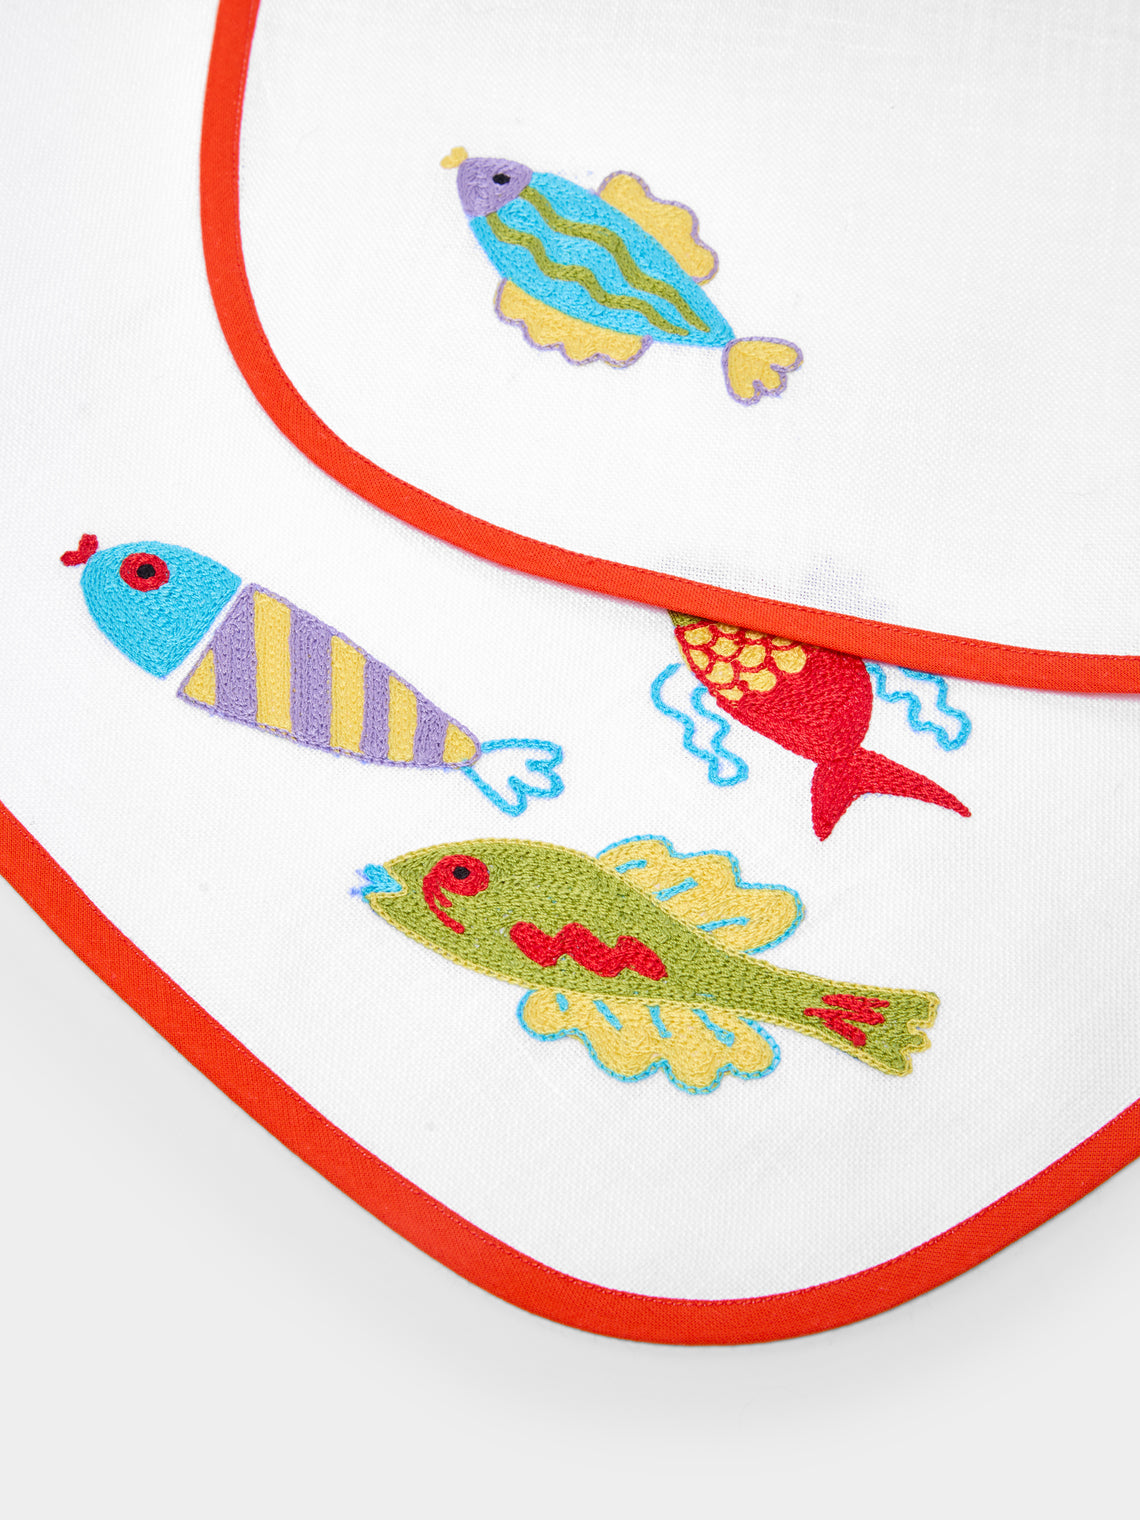 Loretta Caponi - Mendini Fish Hand-Embroidered Linen Placemats (Set of 2) -  - ABASK